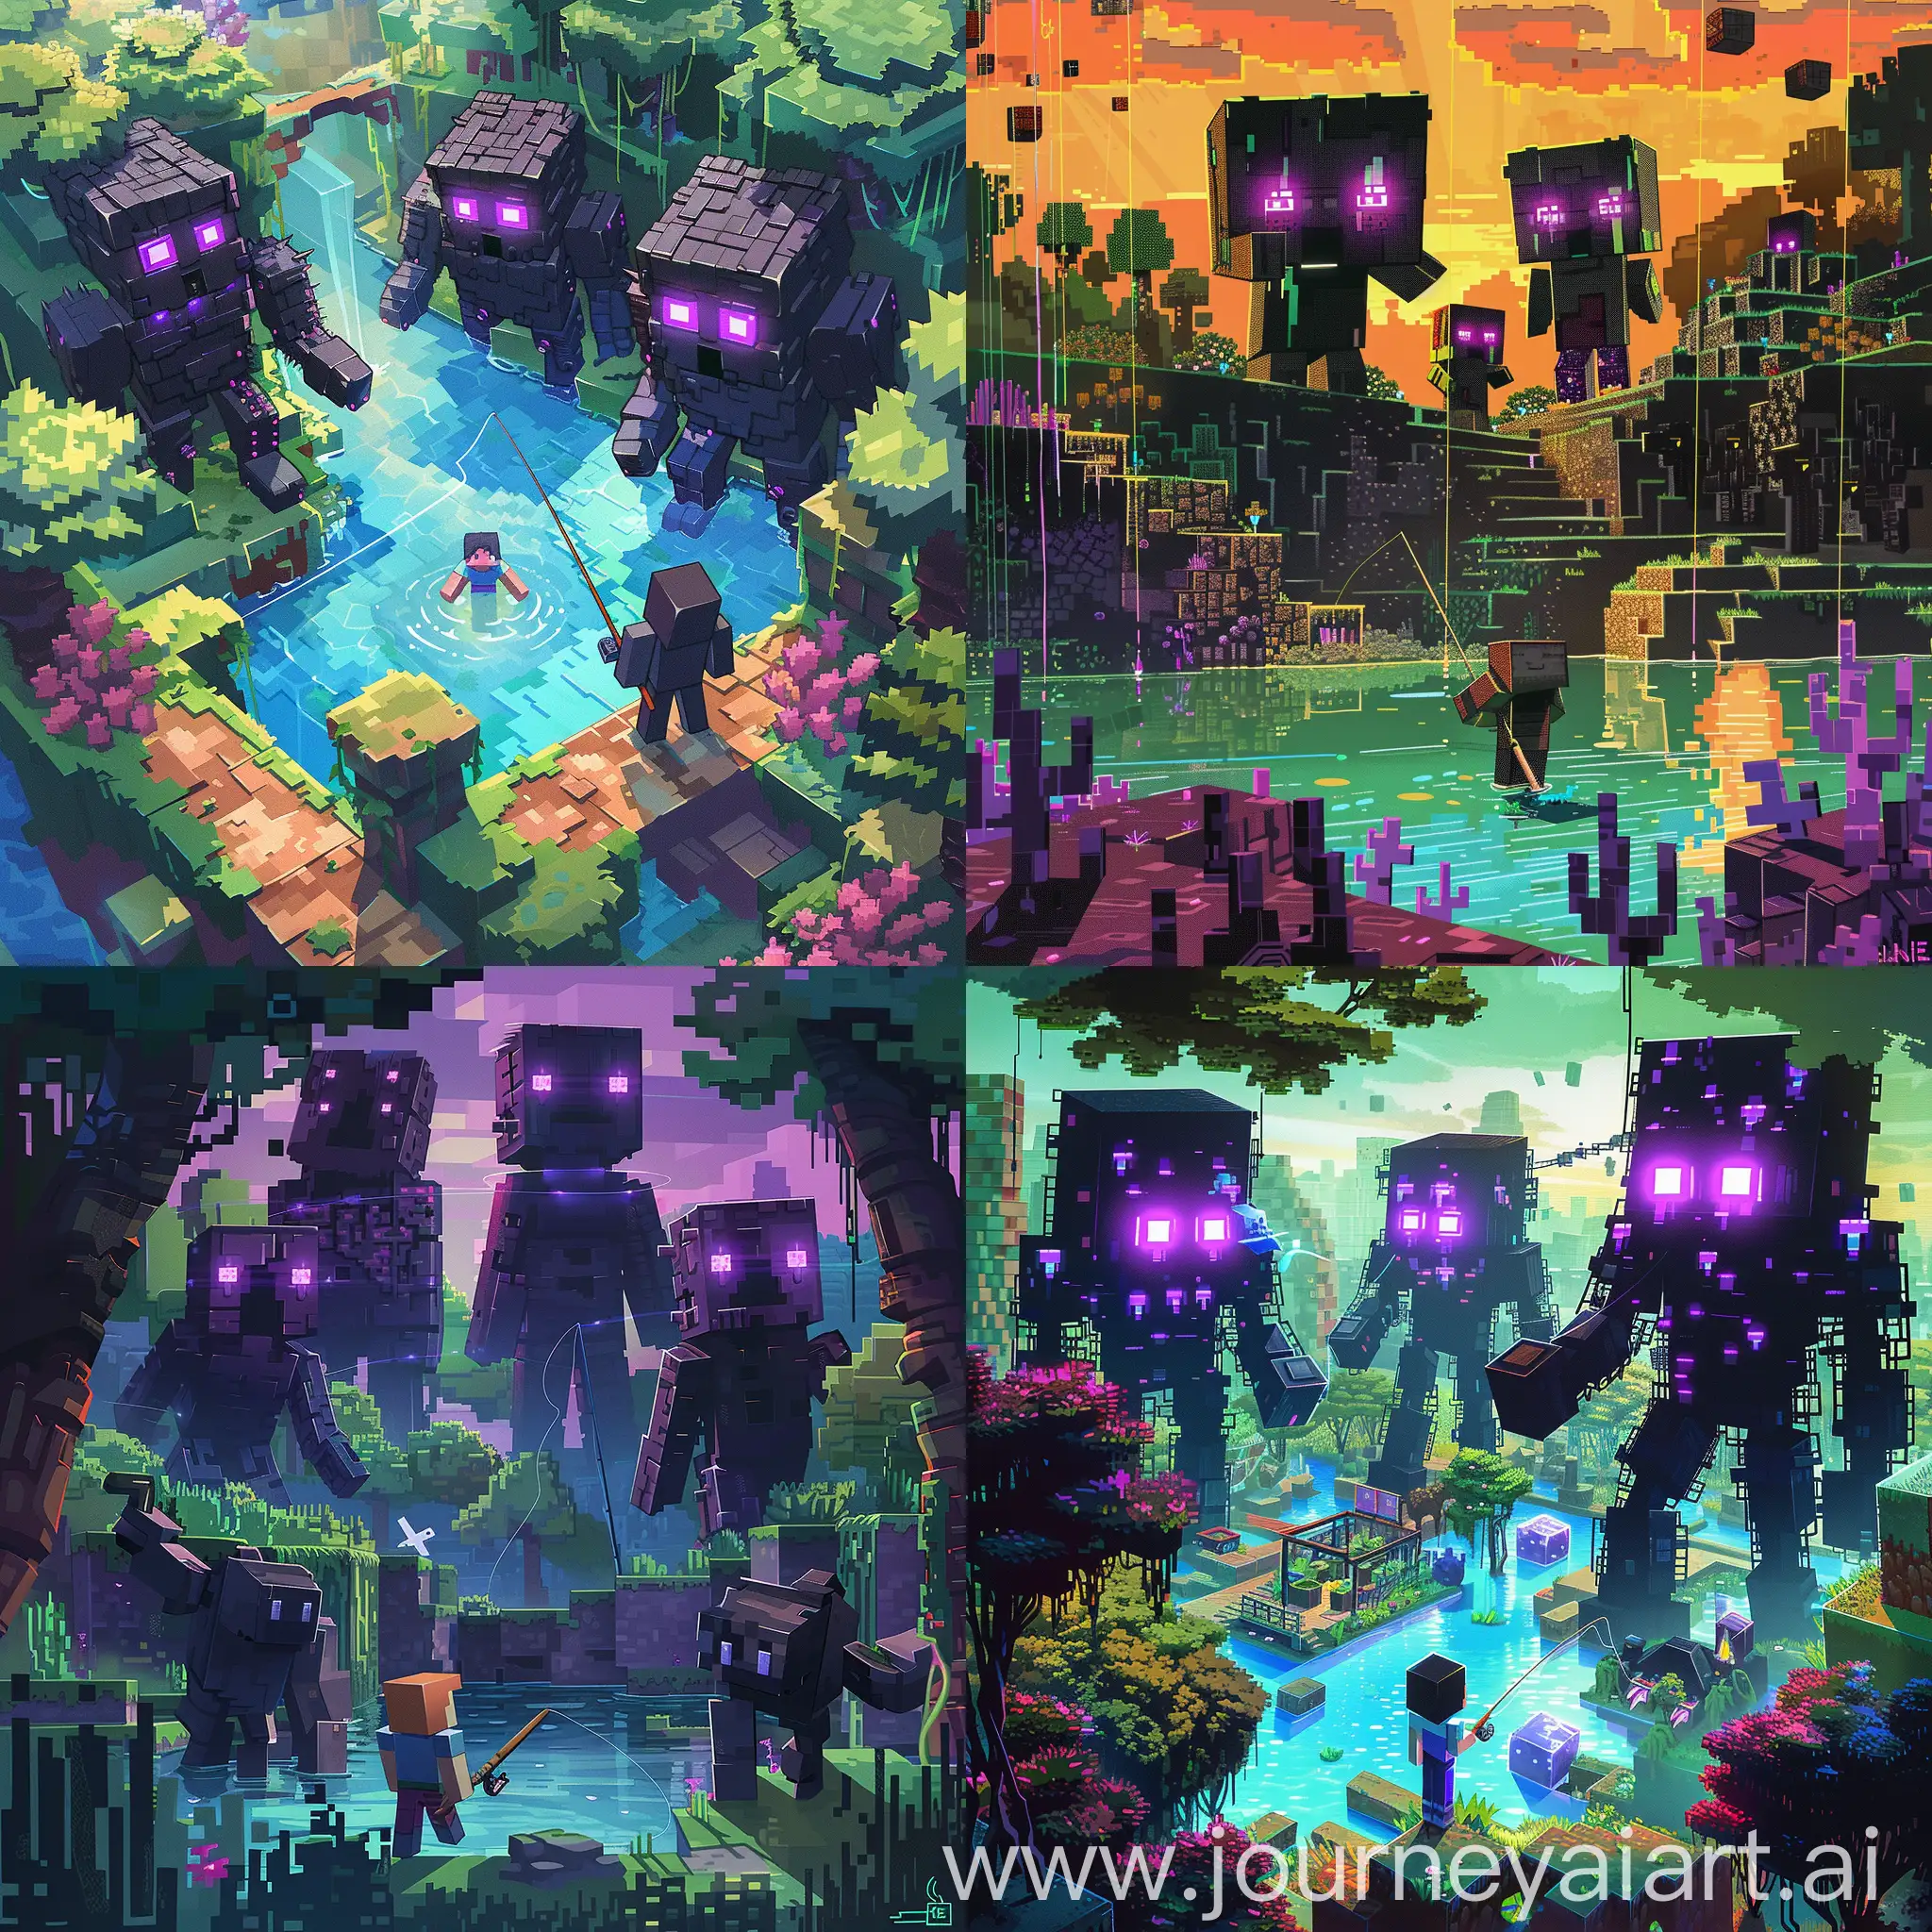 A vibrant digital illustration depicts a bustling scene within a Minecraft world, featuring three iconic elements: Endermen, a player character (commonly referred to as a noob or newbie), and a fishing rod. The Endermen, towering and dark, loom ominously in the background, their purple eyes glowing with an otherworldly light. The player character, depicted with simplistic yet endearing features, stands in the foreground, eagerly wielding a fishing rod with anticipation. The fishing rod, intricately detailed with its fishing line extending into a nearby body of water, adds a dynamic element to the composition. The environment showcases the blocky terrain and pixelated foliage characteristic of Minecraft, with vibrant colors and detailed textures bringing the scene to life. The illustration captures the essence of exploration and adventure inherent to the game, emphasizing the importance of these elements in the player's journey. 